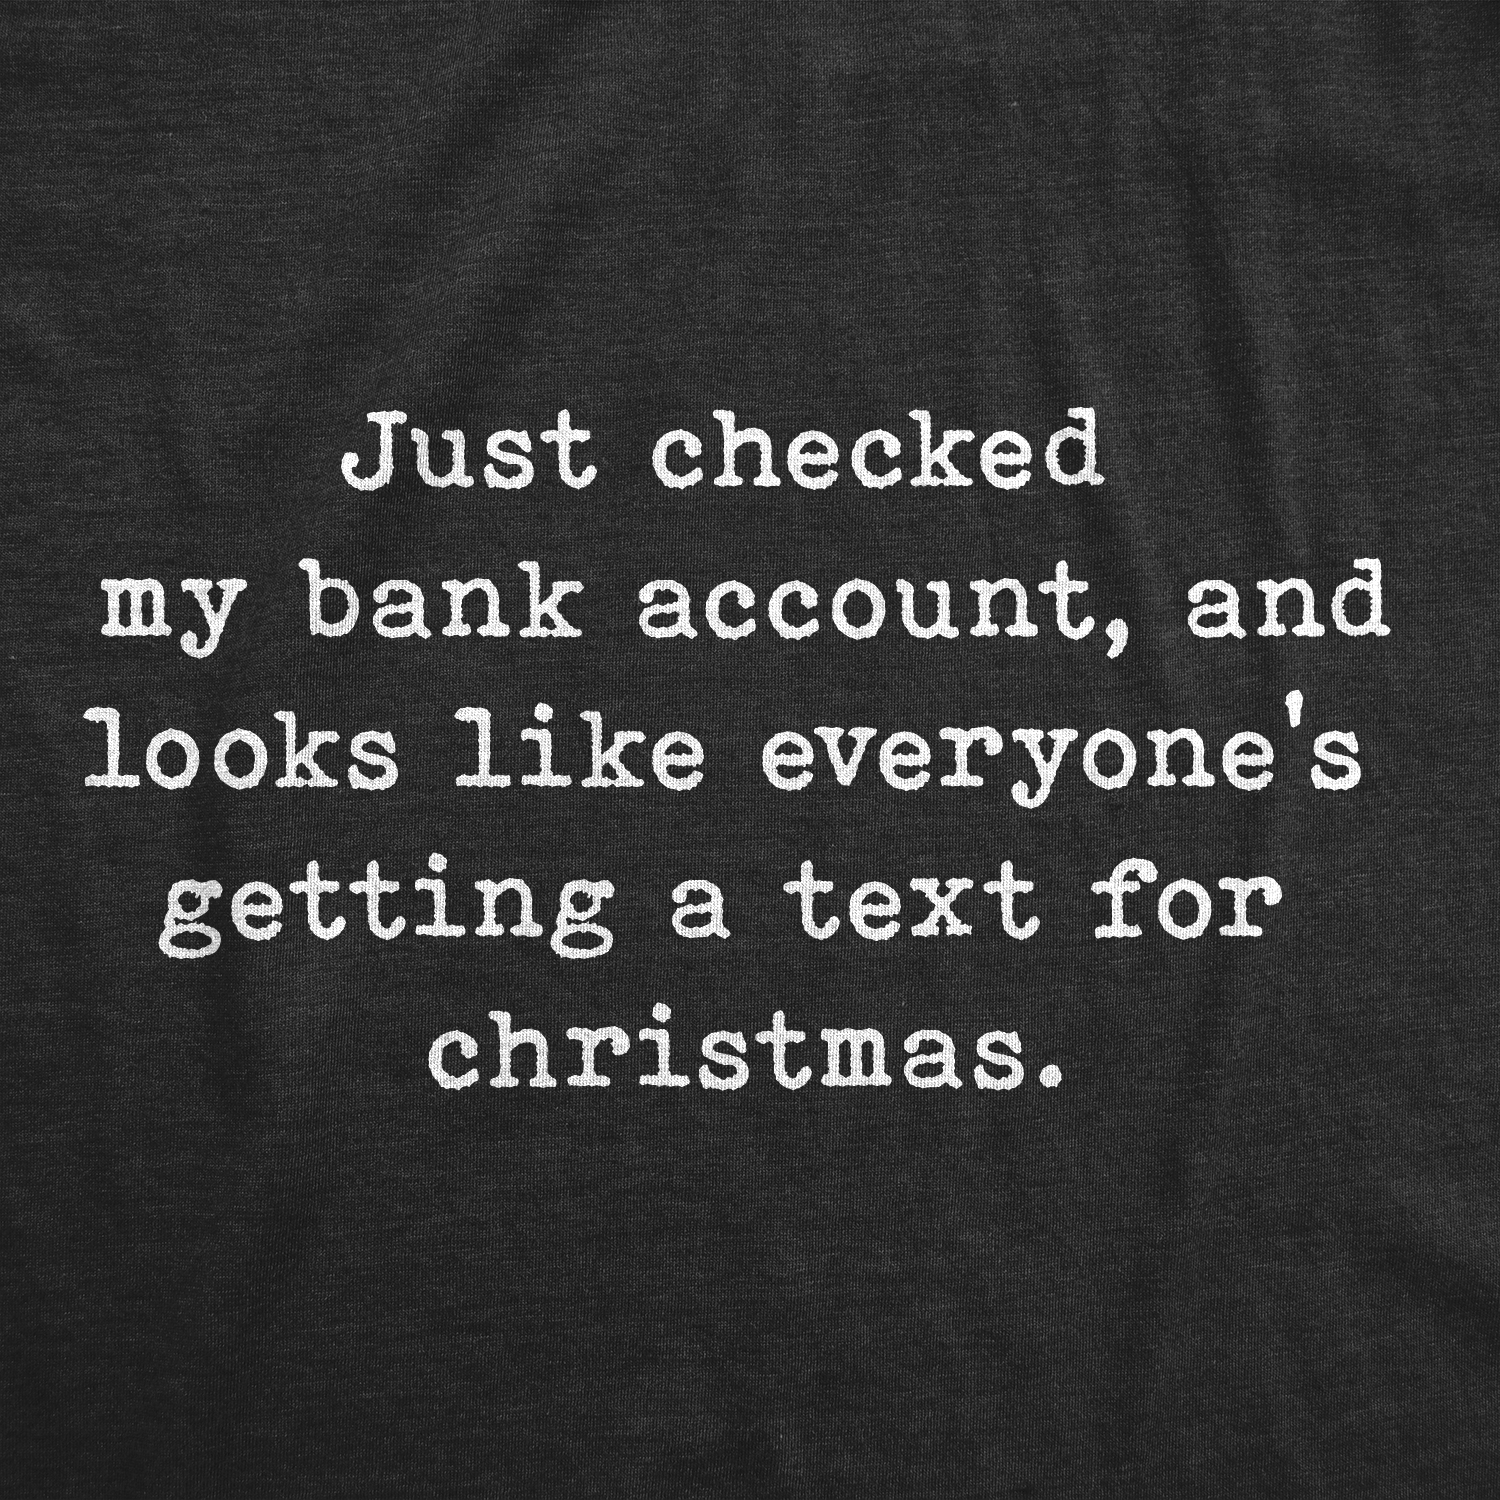 Crazy Dog Tshirts Mens Just Checked My Bank Account And Looks Like Everyones Getting A Text For Christmas Tshirt